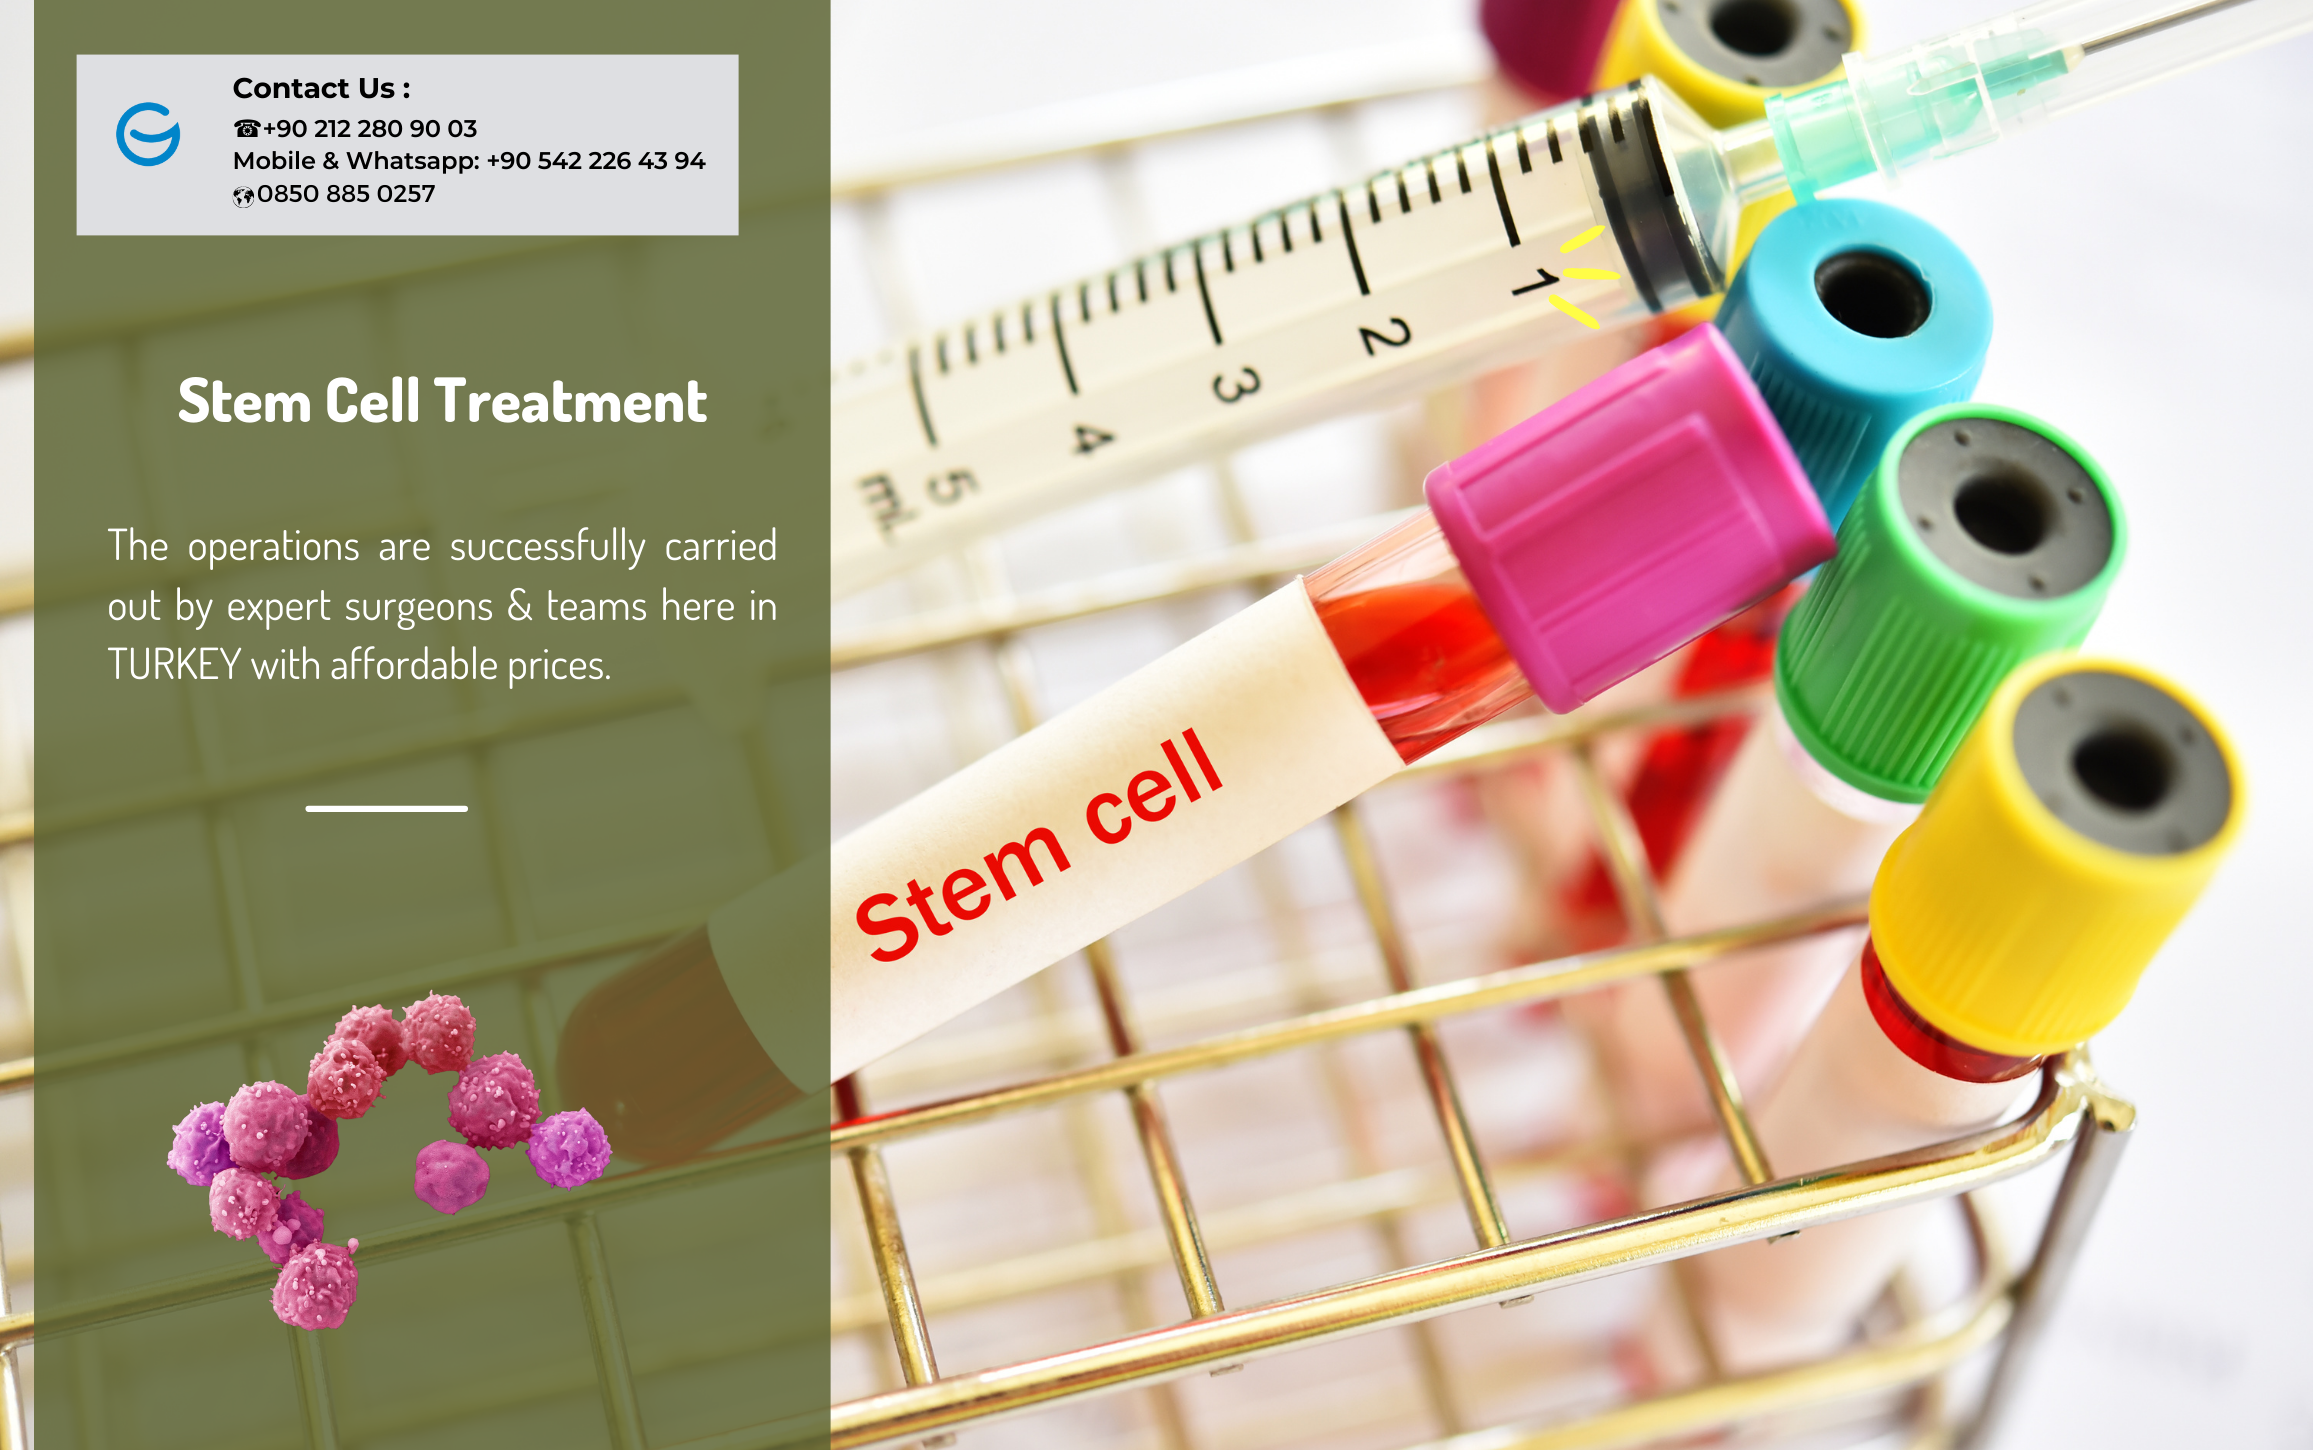 Make A Difference with Stem Cell Treatment